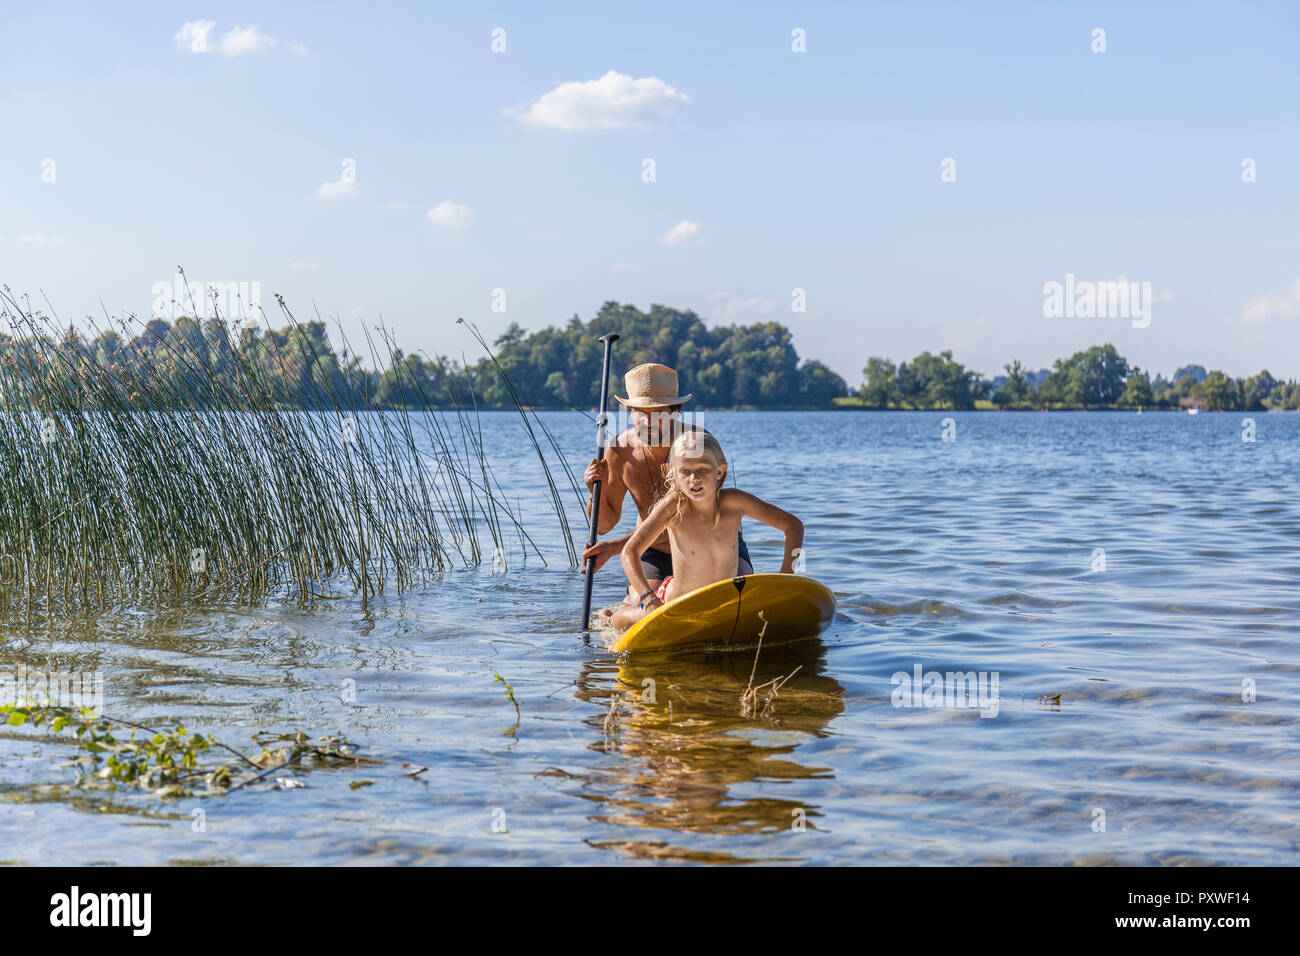 Vater und Tochter Paddle Boarding auf See Stockfoto